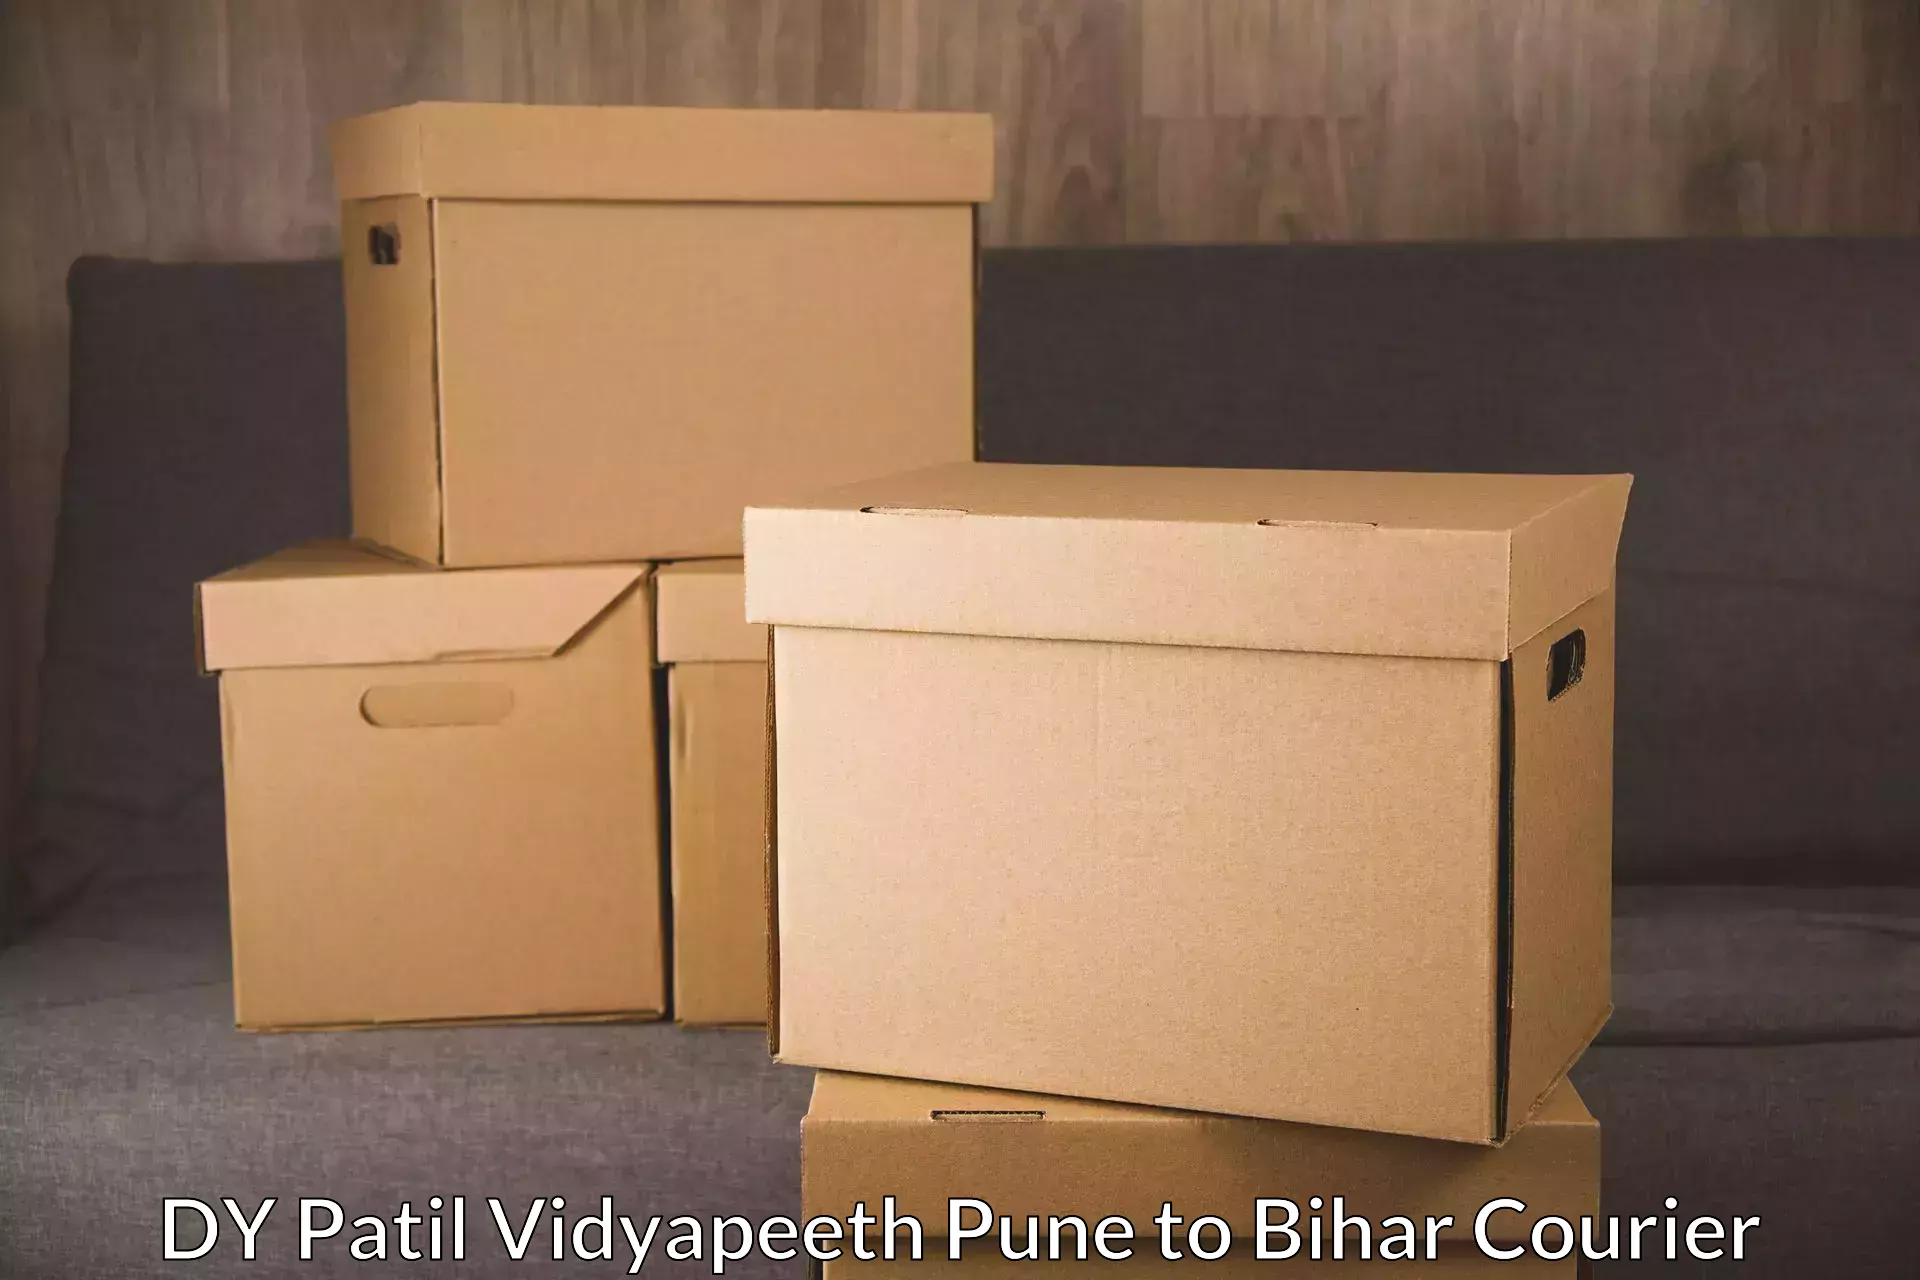 Courier service efficiency DY Patil Vidyapeeth Pune to Bagaha